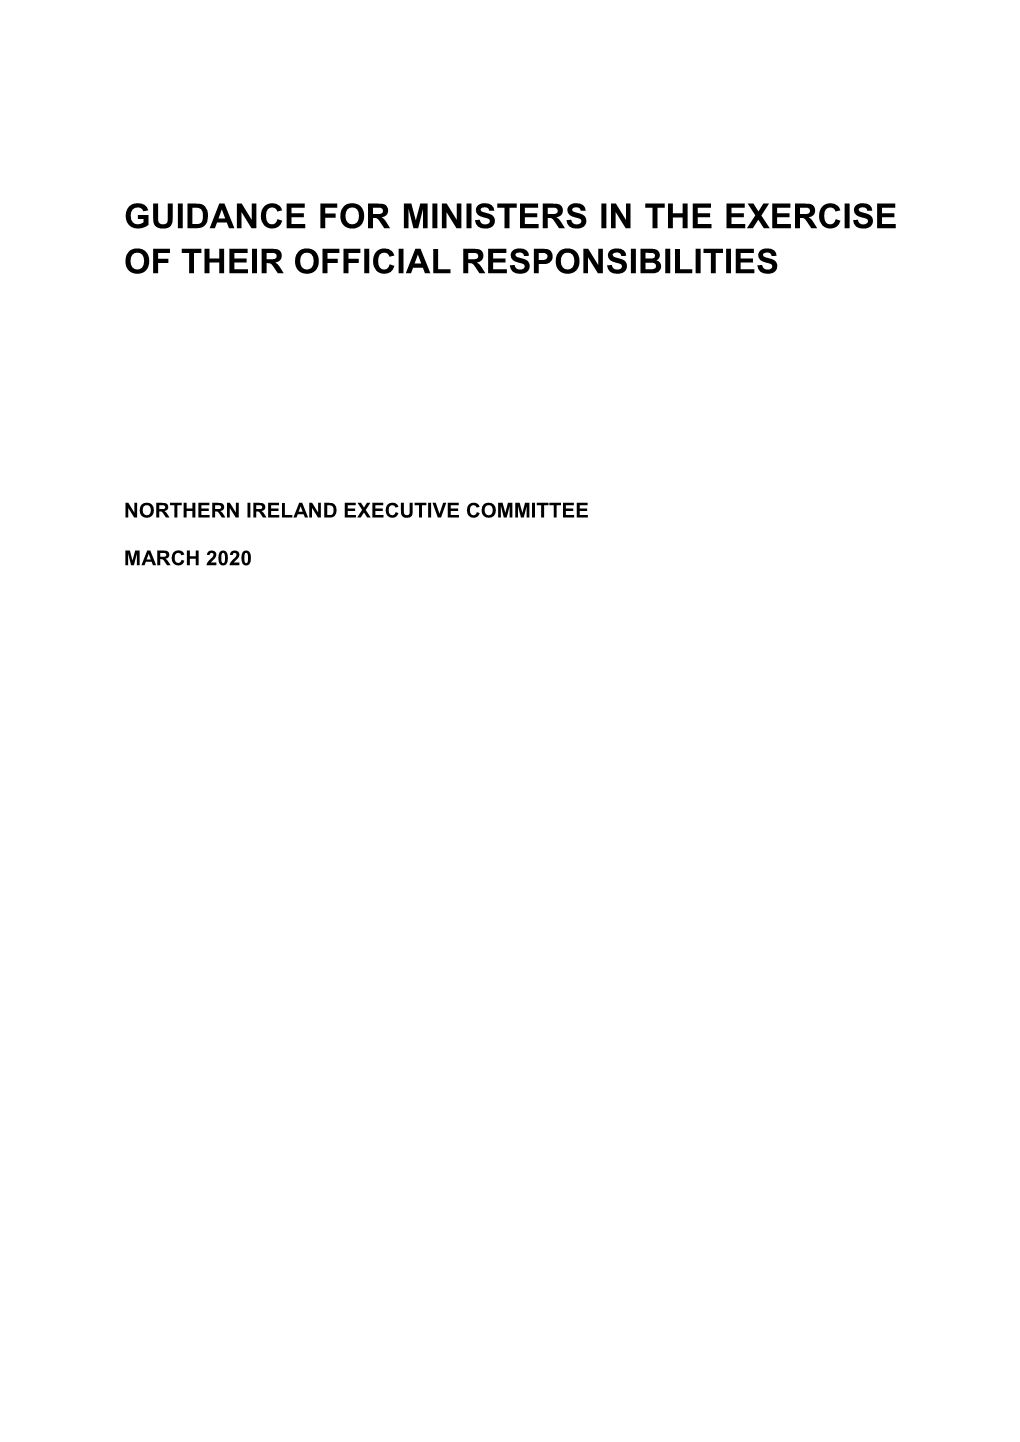 Guidance for Ministers in the Exercise of Their Official Responsibilities